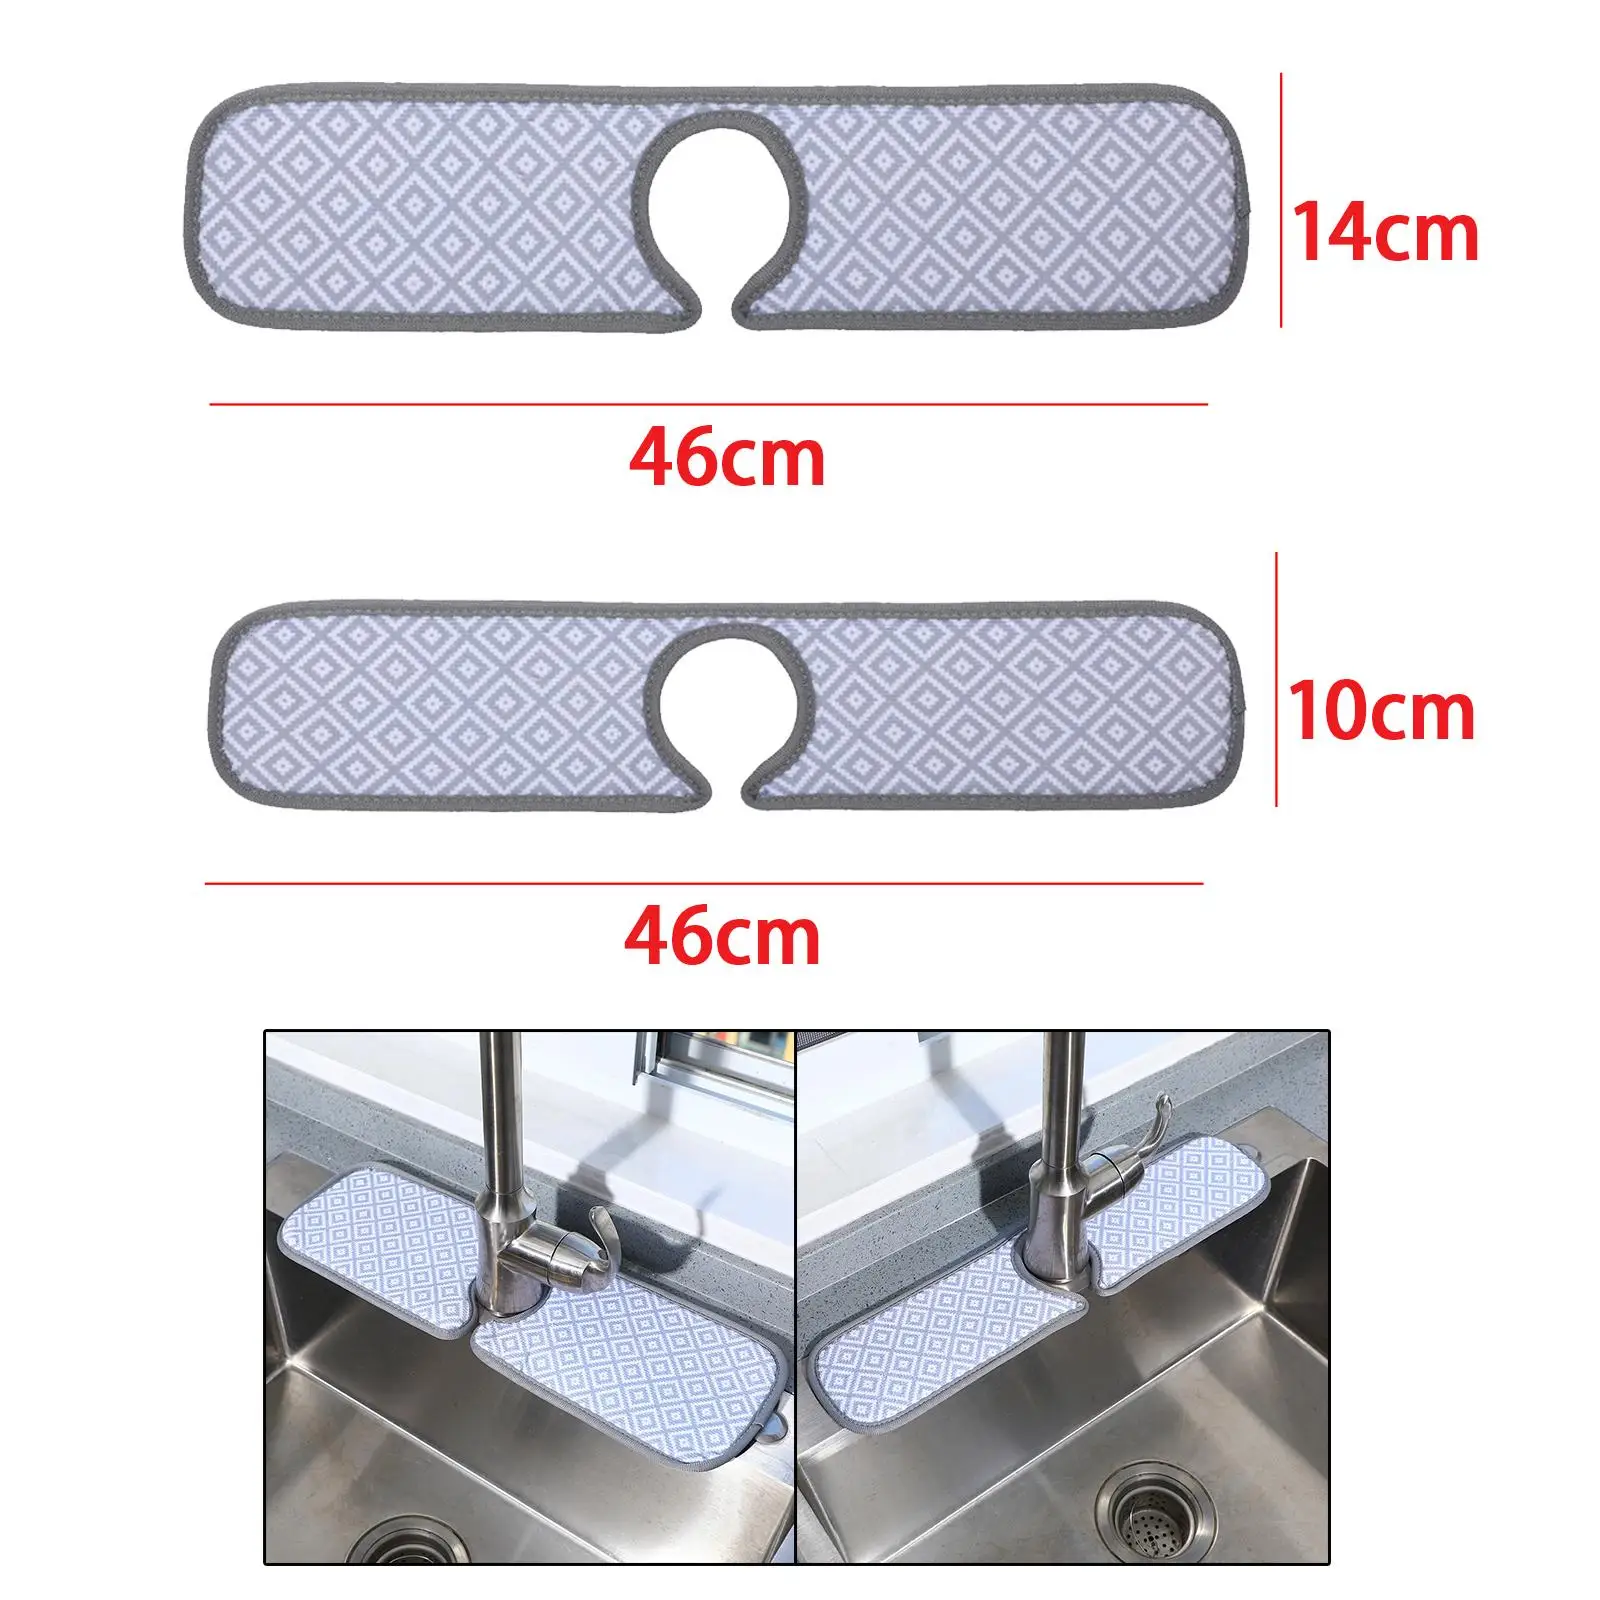 Faucet Wrap Around Mat Sink Drying Mat Drip and Easy to Use